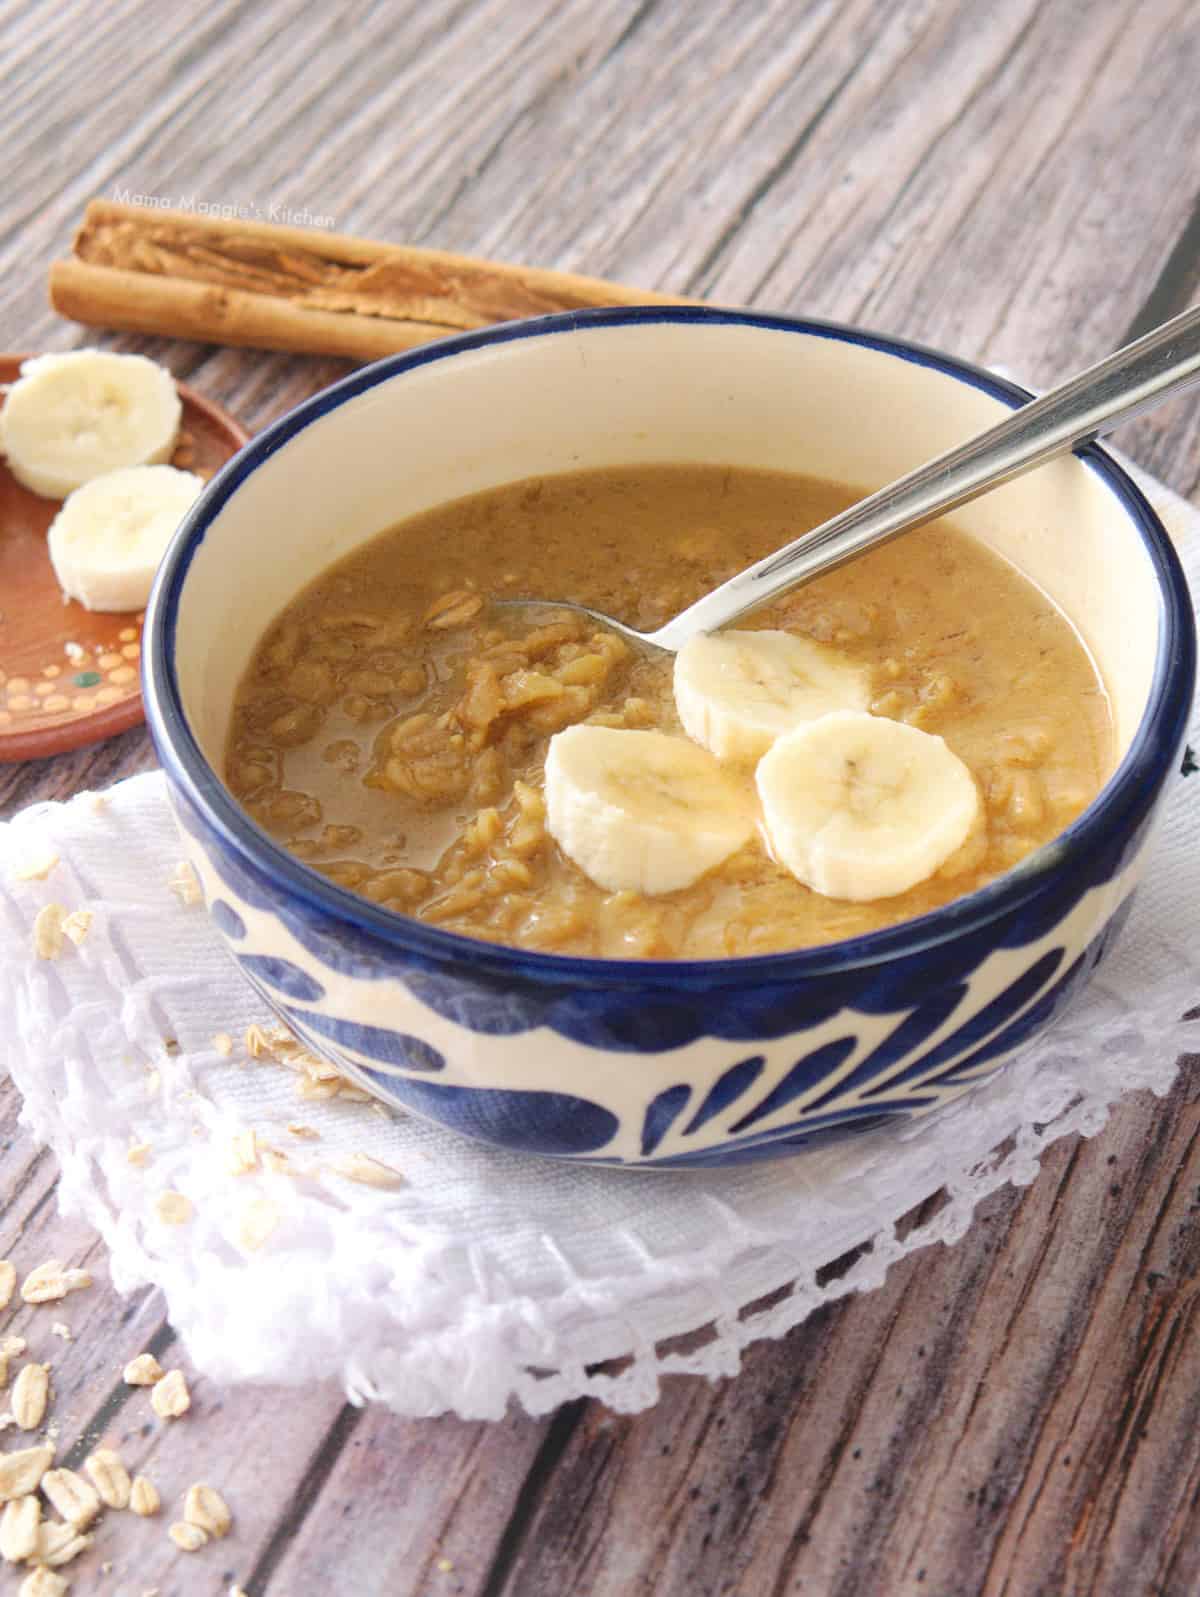 Mexican avena served in a blue bowl and topped with banana slices.